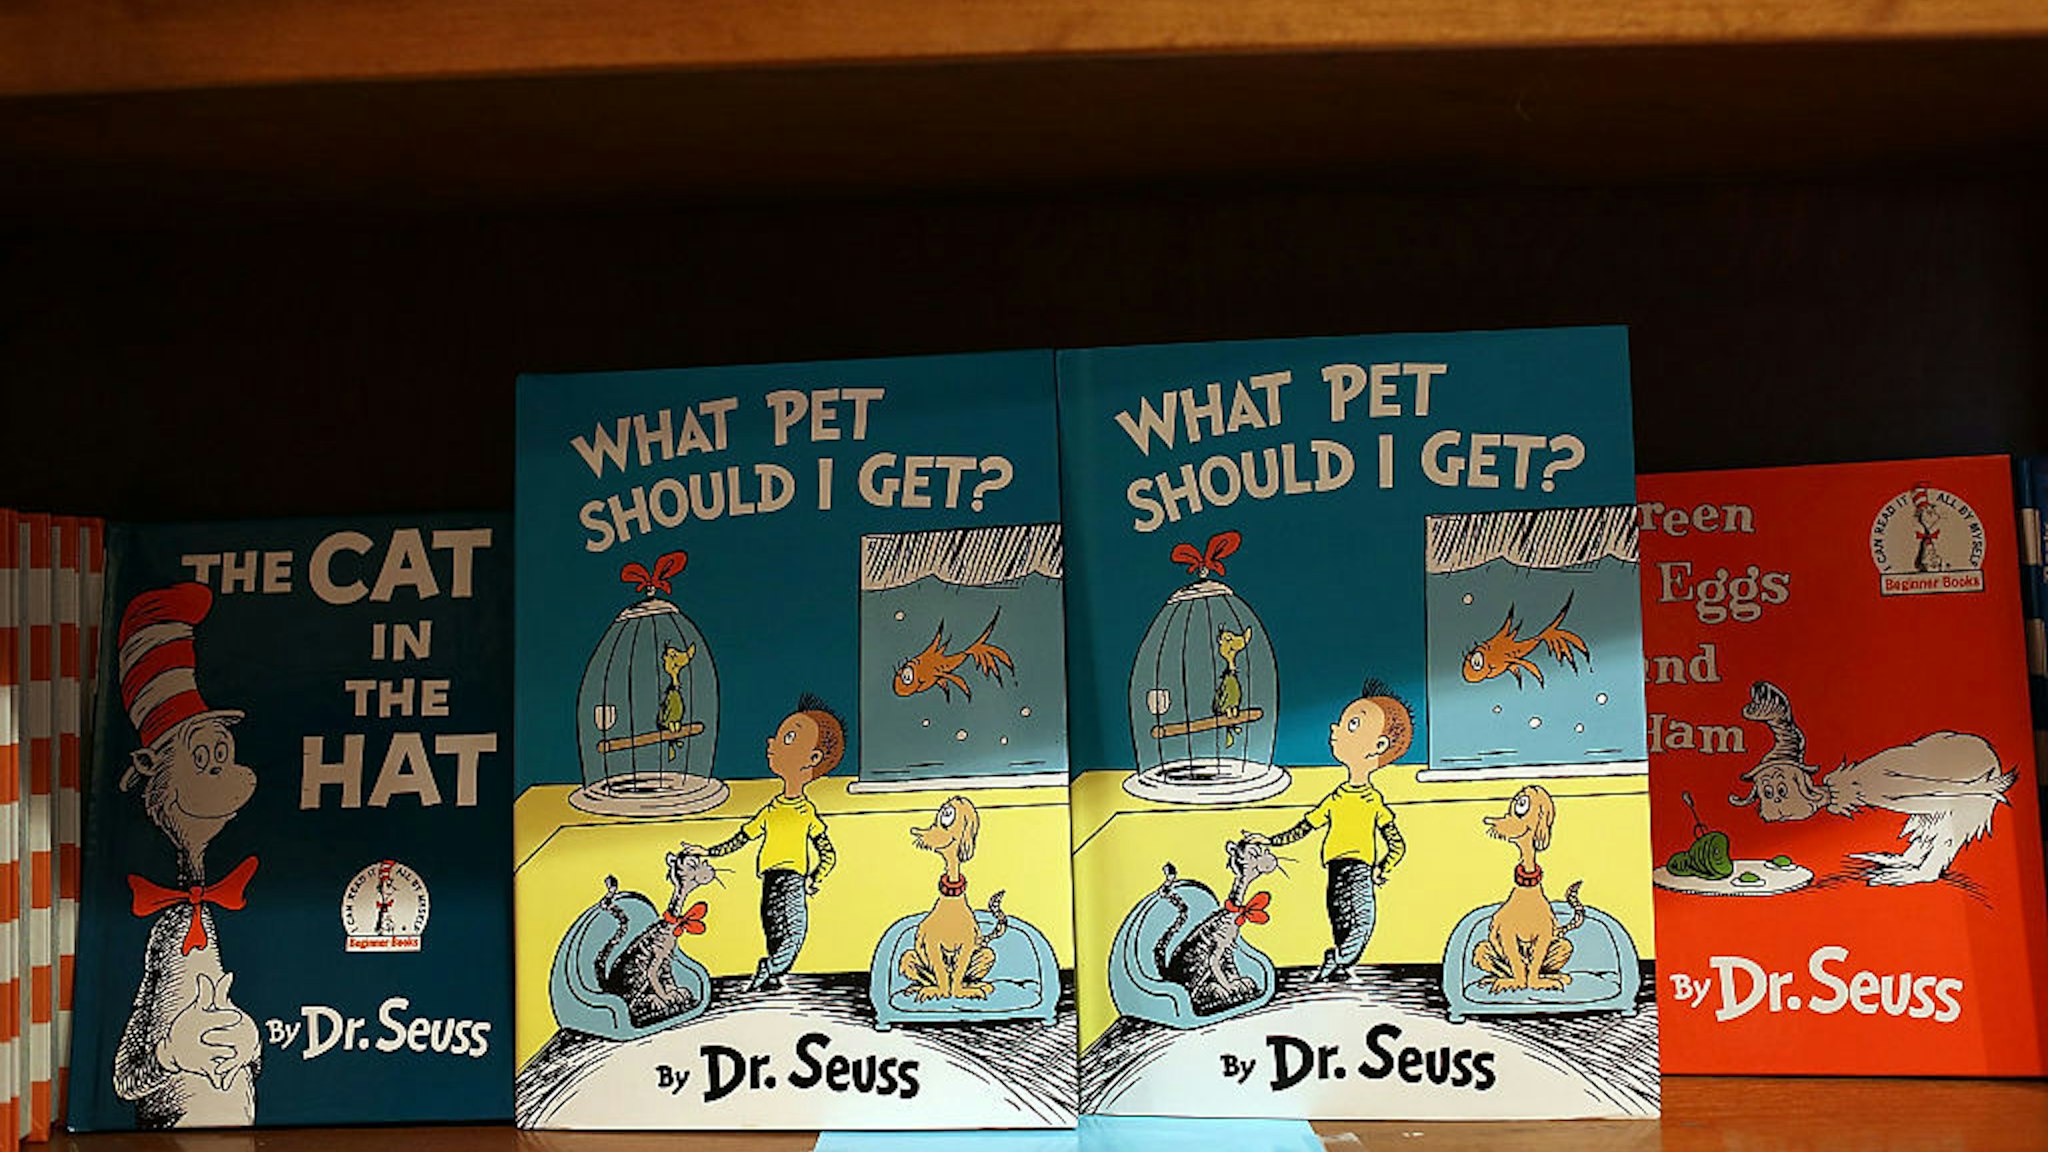 CORAL GABLES, FL - JULY 28: Dr. Seuss' never-before-published book, "What Pet Should I Get?" is seen on display on the day it is released for sale at the Books and Books store on July 28, 2015 in Coral Gables, United States. The manuscript by the author Theodor Geisel is reported to have been written in the 1950s or 1960s and stashed away in his office until his widow found it in 2013. (Photo by Joe Raedle/Getty Images)